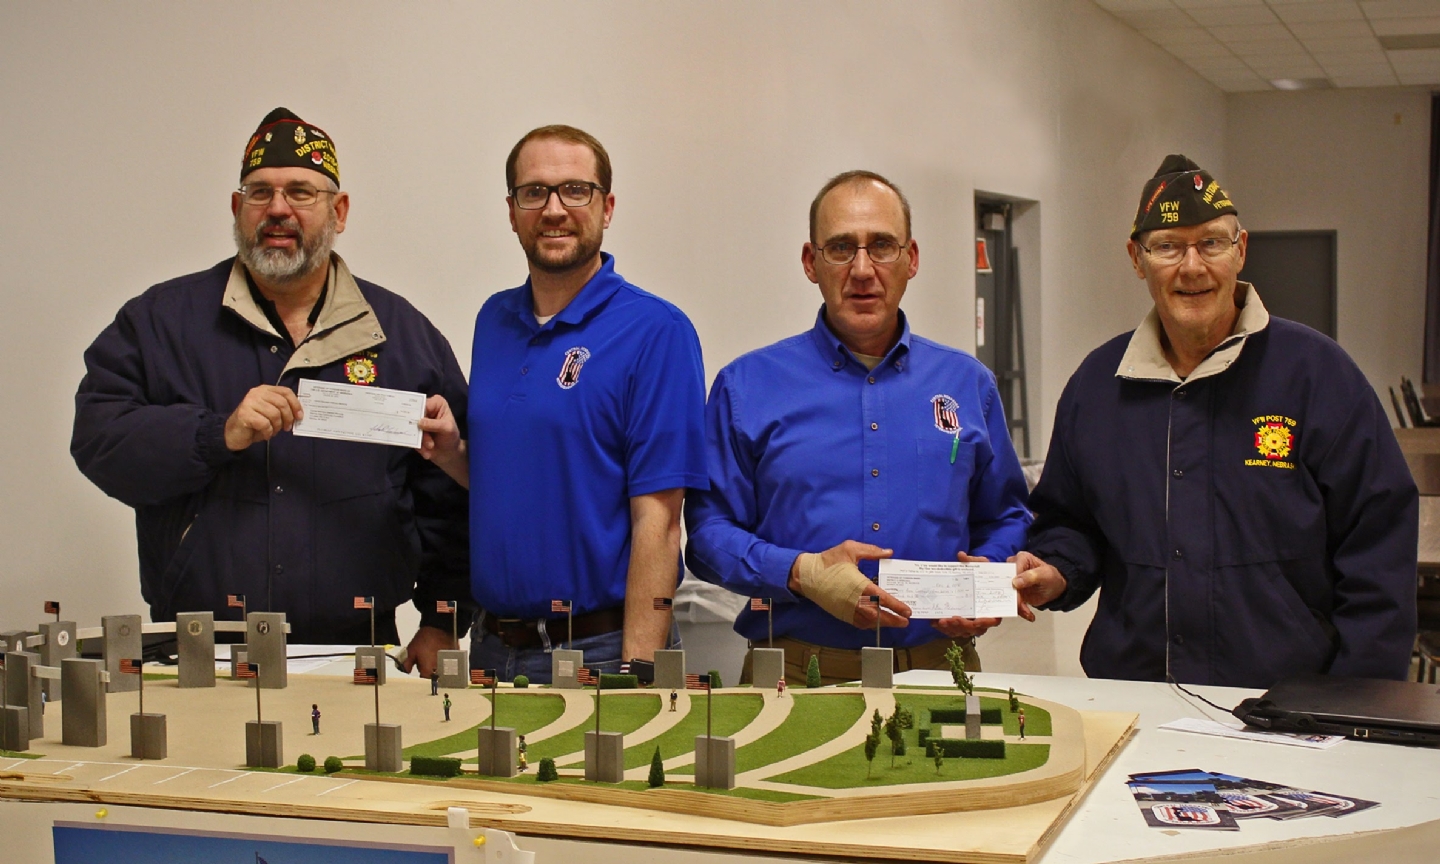 Jim Lutz, Cdr District 13, presets Alex Straatmann a check for $1,000 from the district, and John Kruse, Cdr Post 759 presents a check for $5,000 from the VFW Department of Nebrska.  All of these monies go to help build and support the Central Nebraska Veterans Memorial